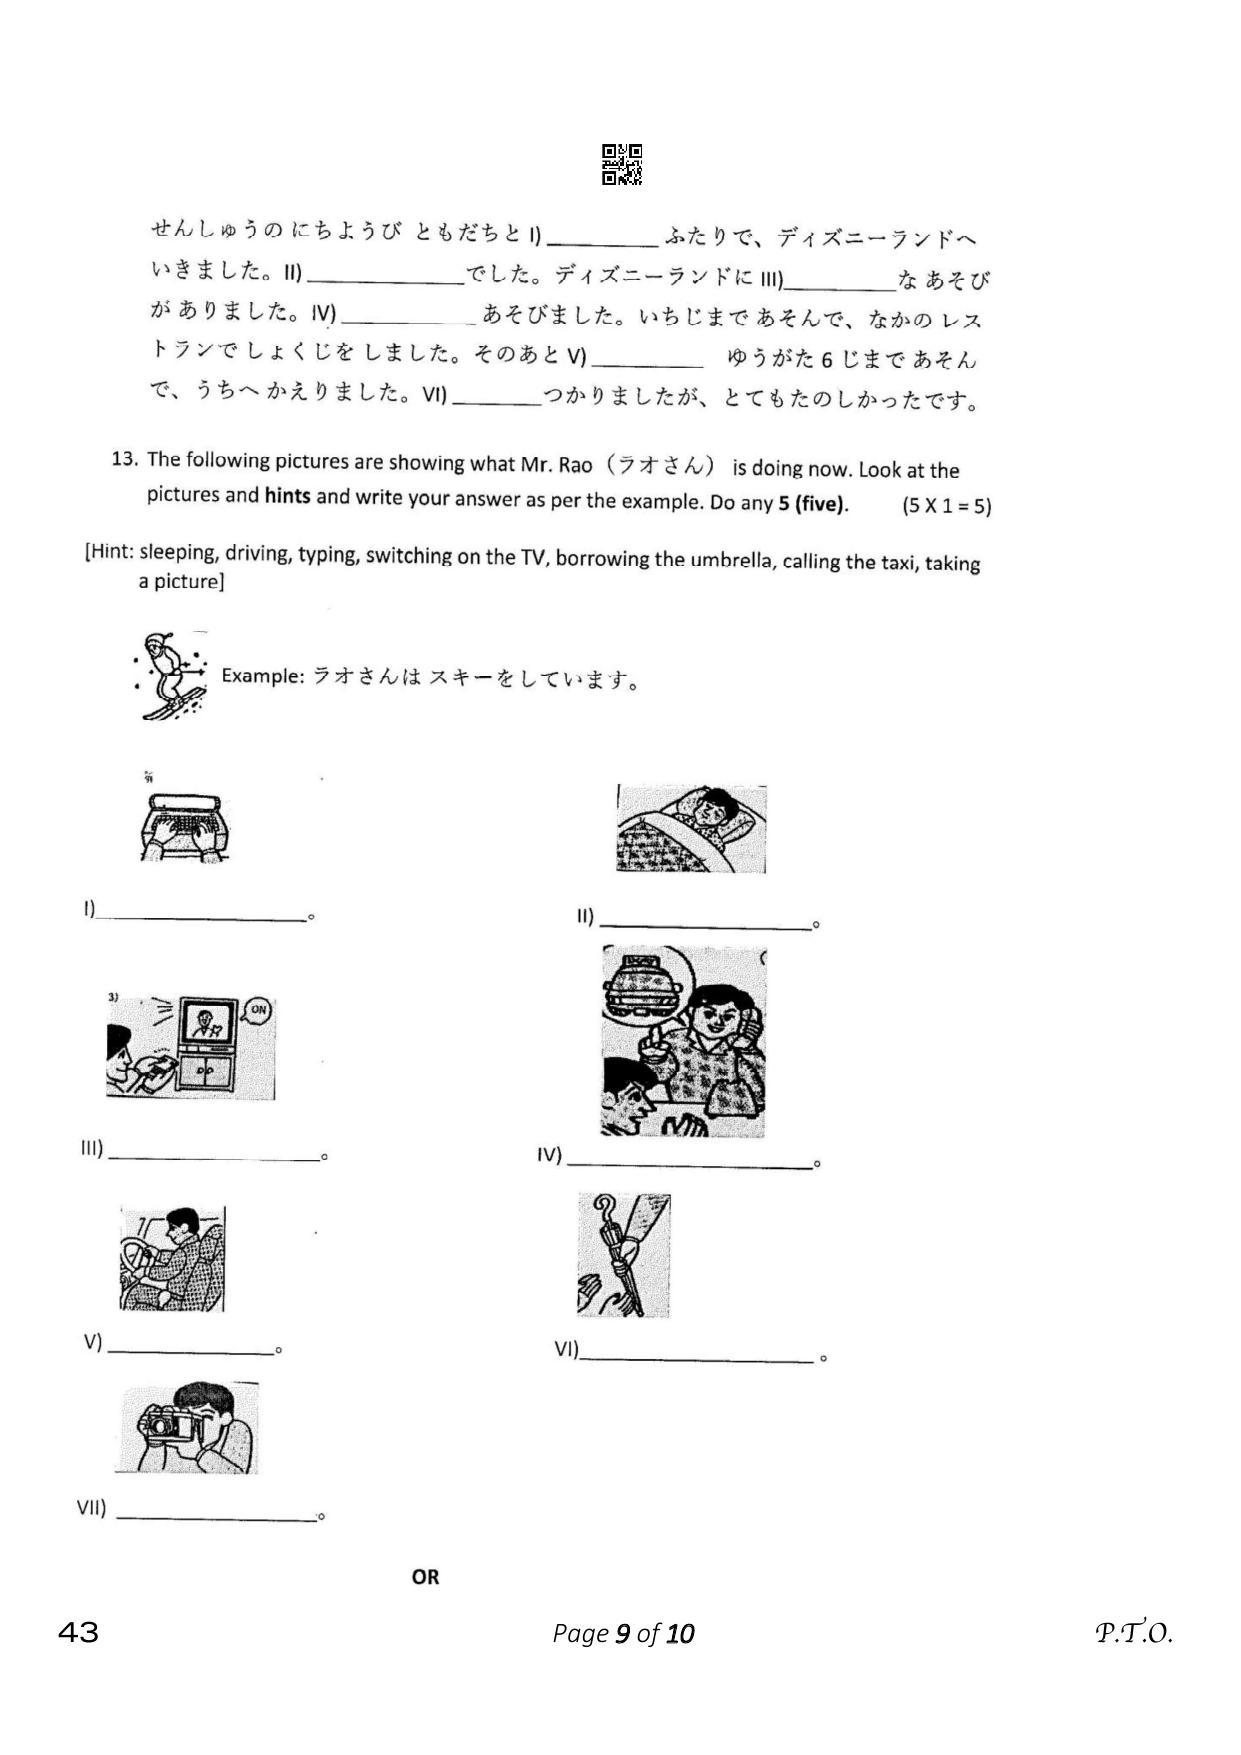 CBSE Class 10 43_Japanese 2023 Question Paper - Page 9